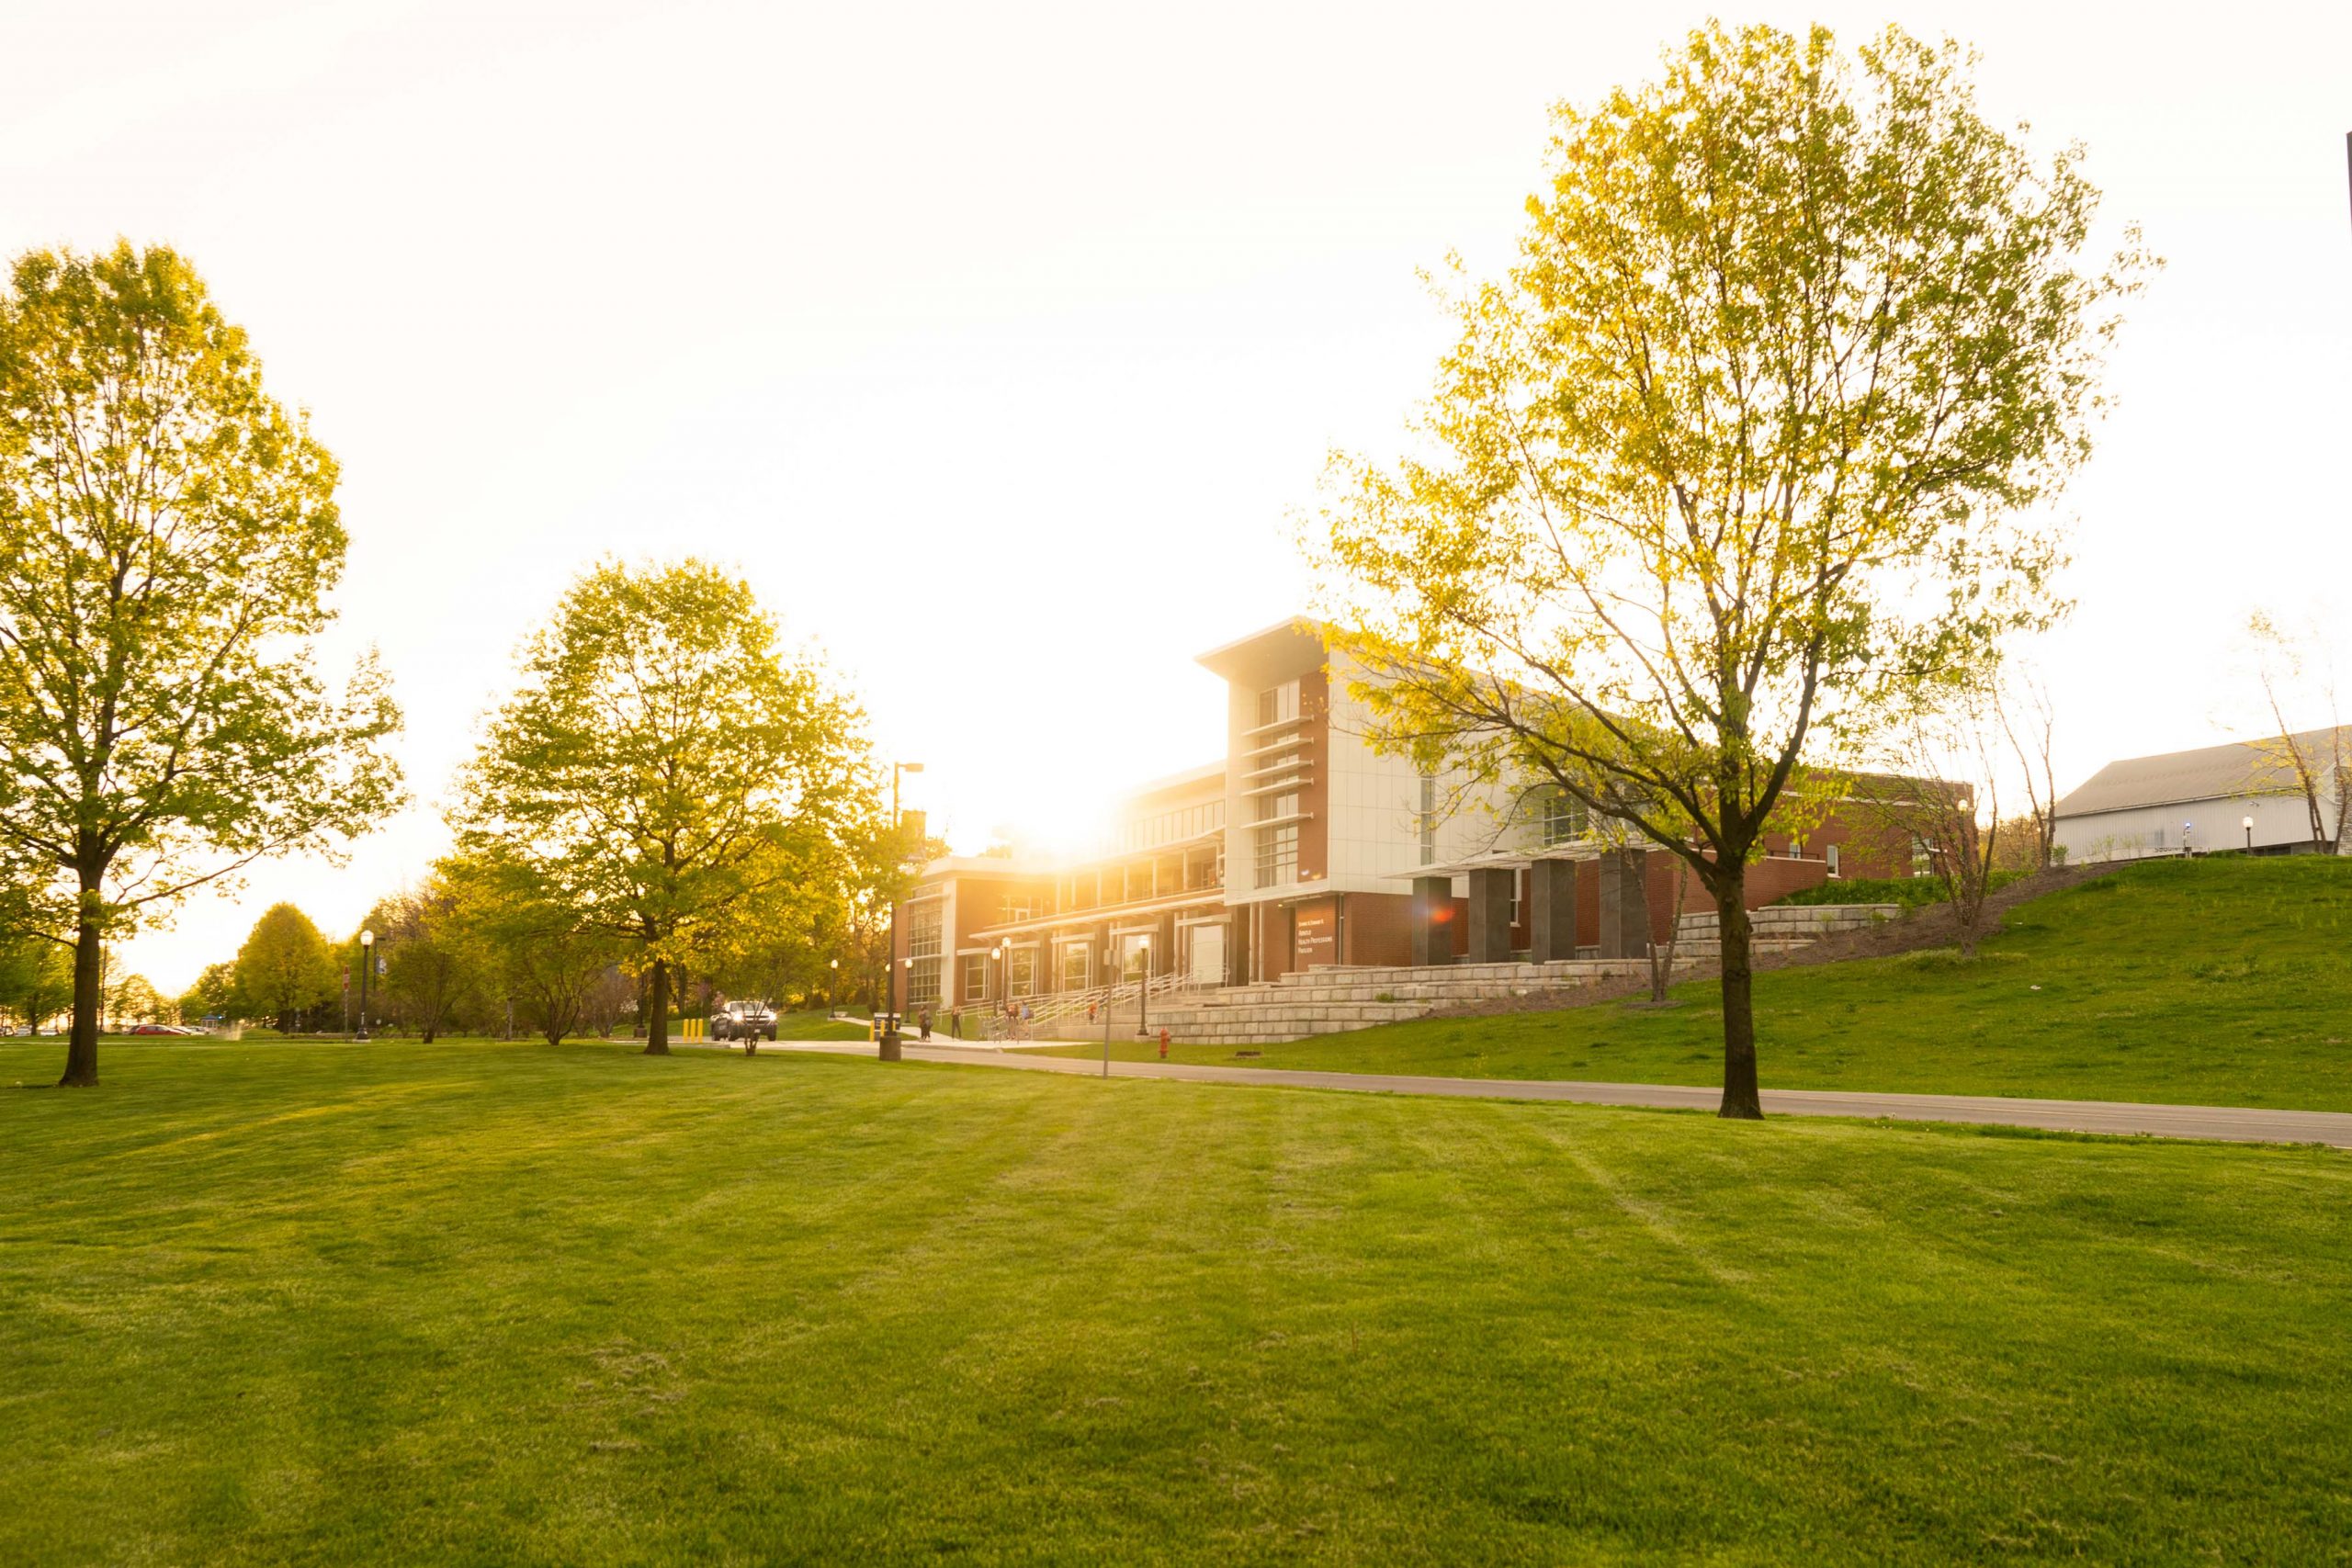 Photo of campus at golden hour